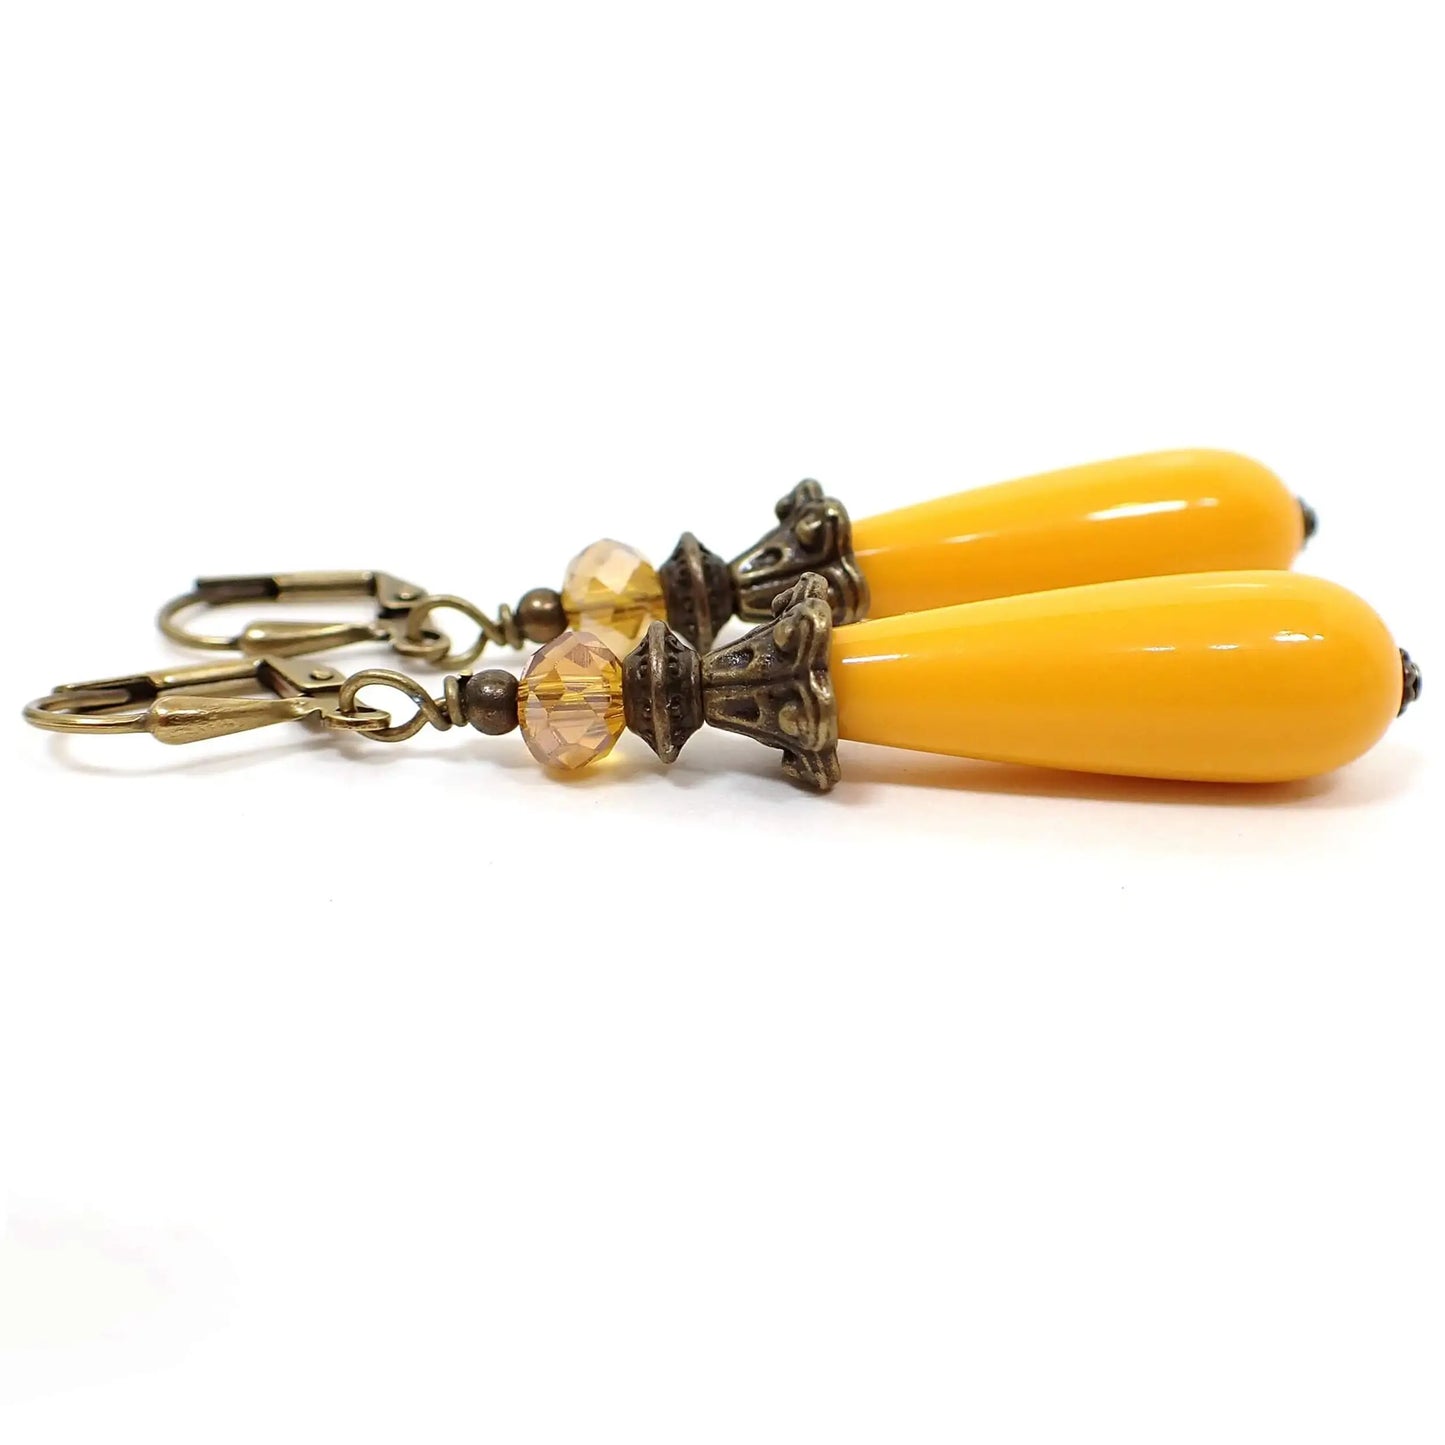 Side view of the handmade yellow teardrop earrings. The metal is antiqued brass in color. There are long lucite teardrop beads at the bottom in a rich yellow color and faceted glass beads at the top with yellow and hints of orange.